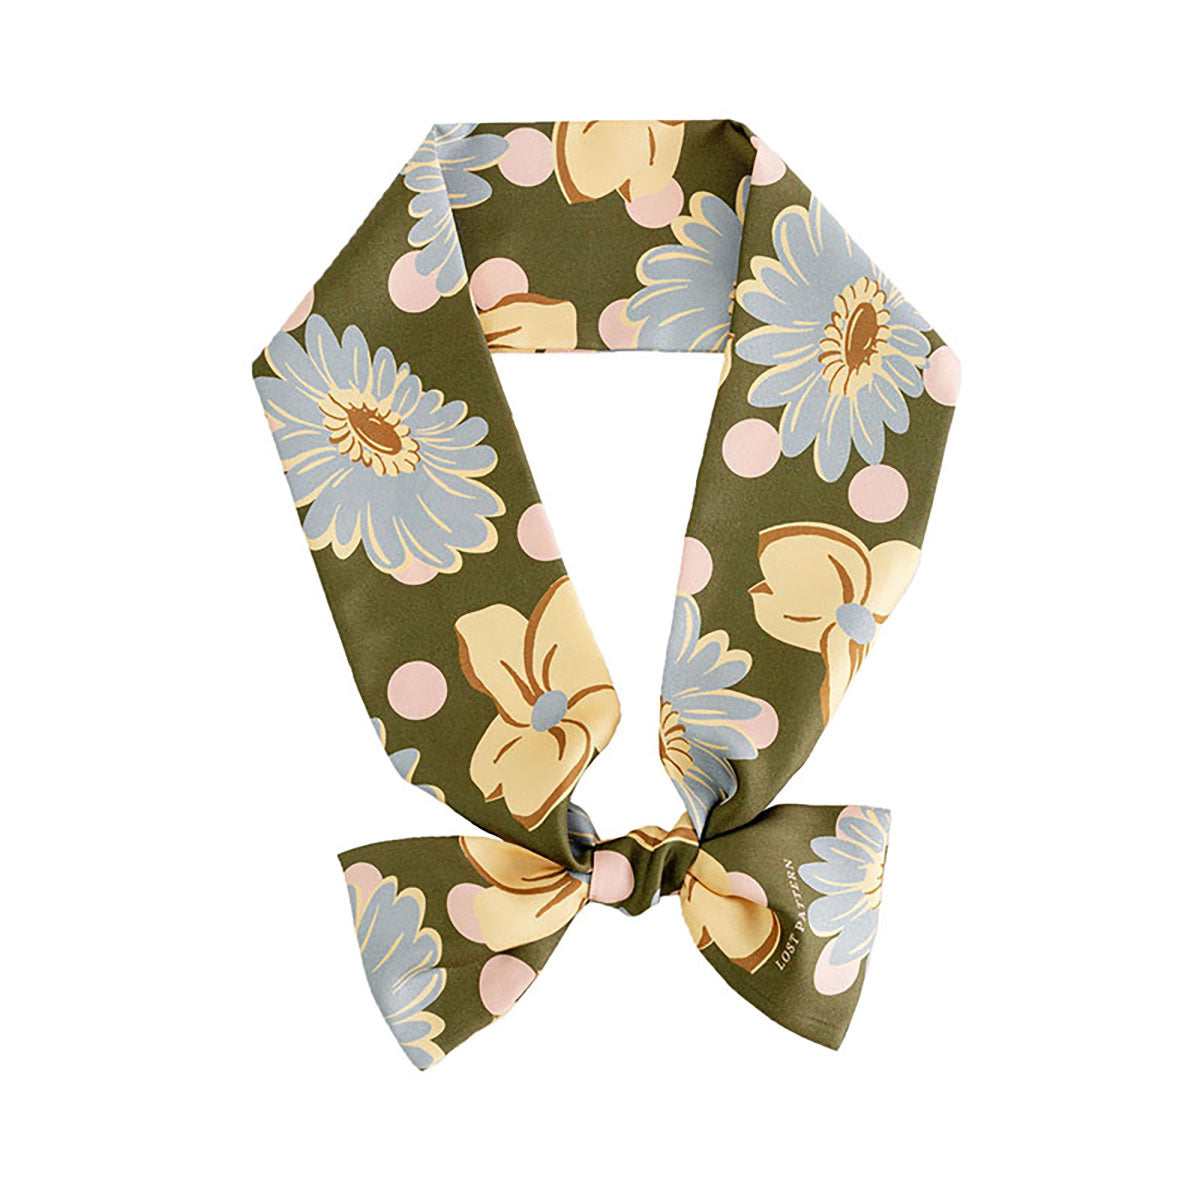 "Miss Daisy" Floral Silk Neck Scarf - Olive Green - Olive Green - LOST PATTERN Silk Skinny Scarf